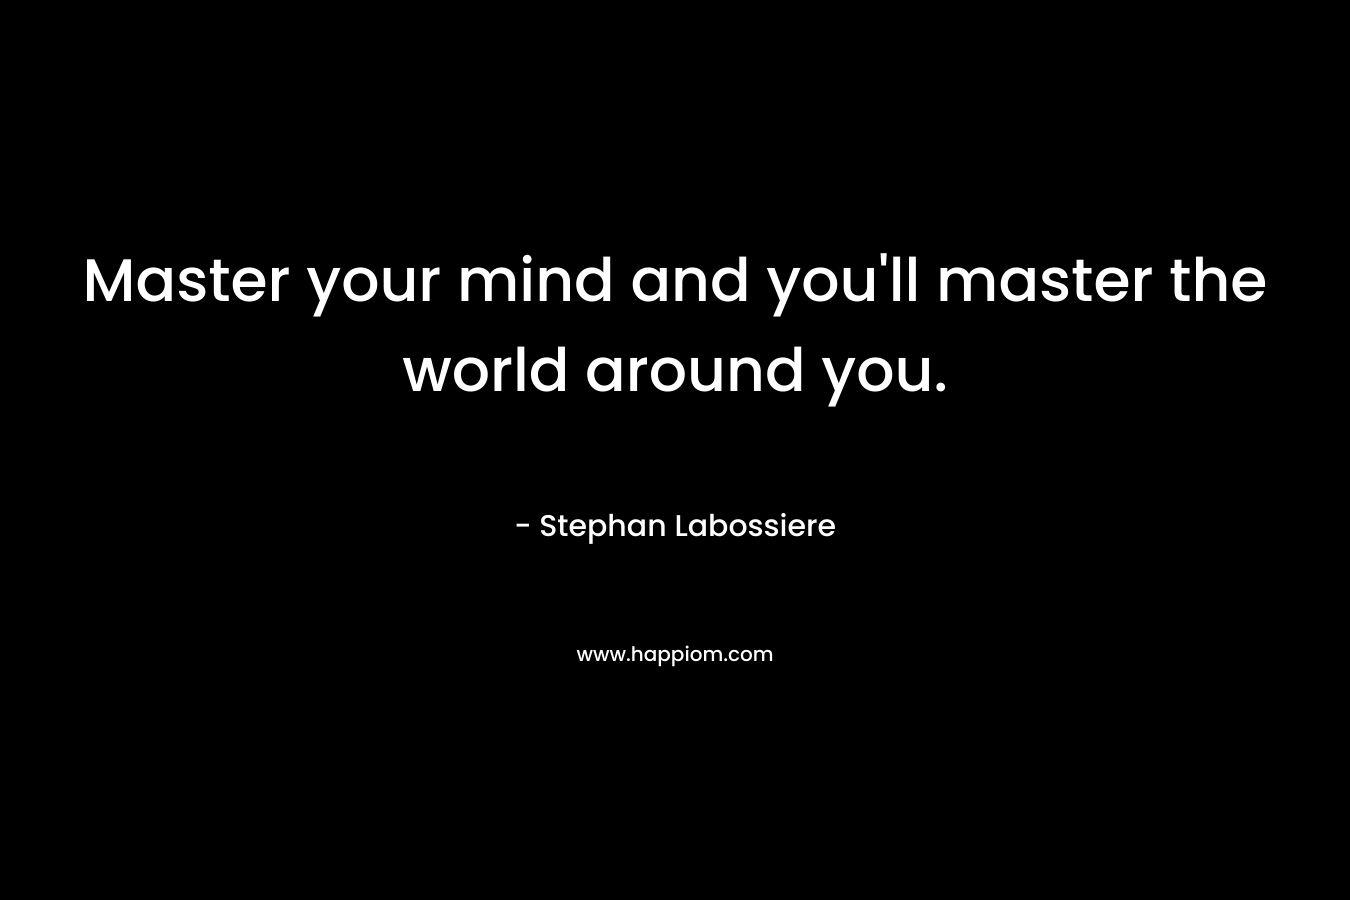 Master your mind and you'll master the world around you.